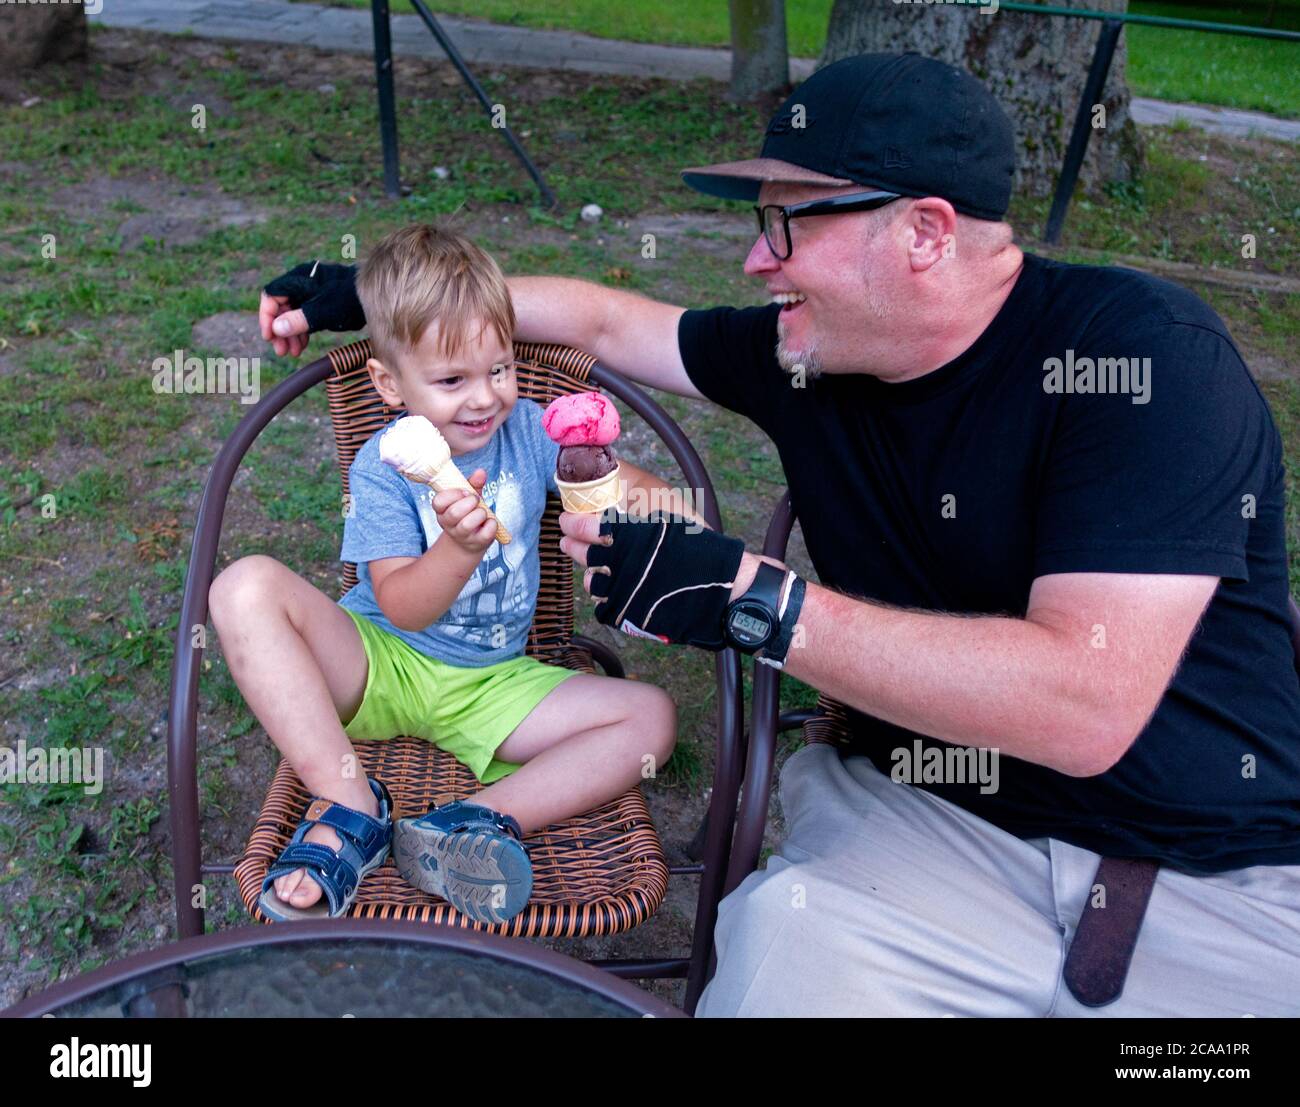 Father and son toasting ice cream cones together in an outdoor patio. Rzeczyca Central Poland Europe Stock Photo